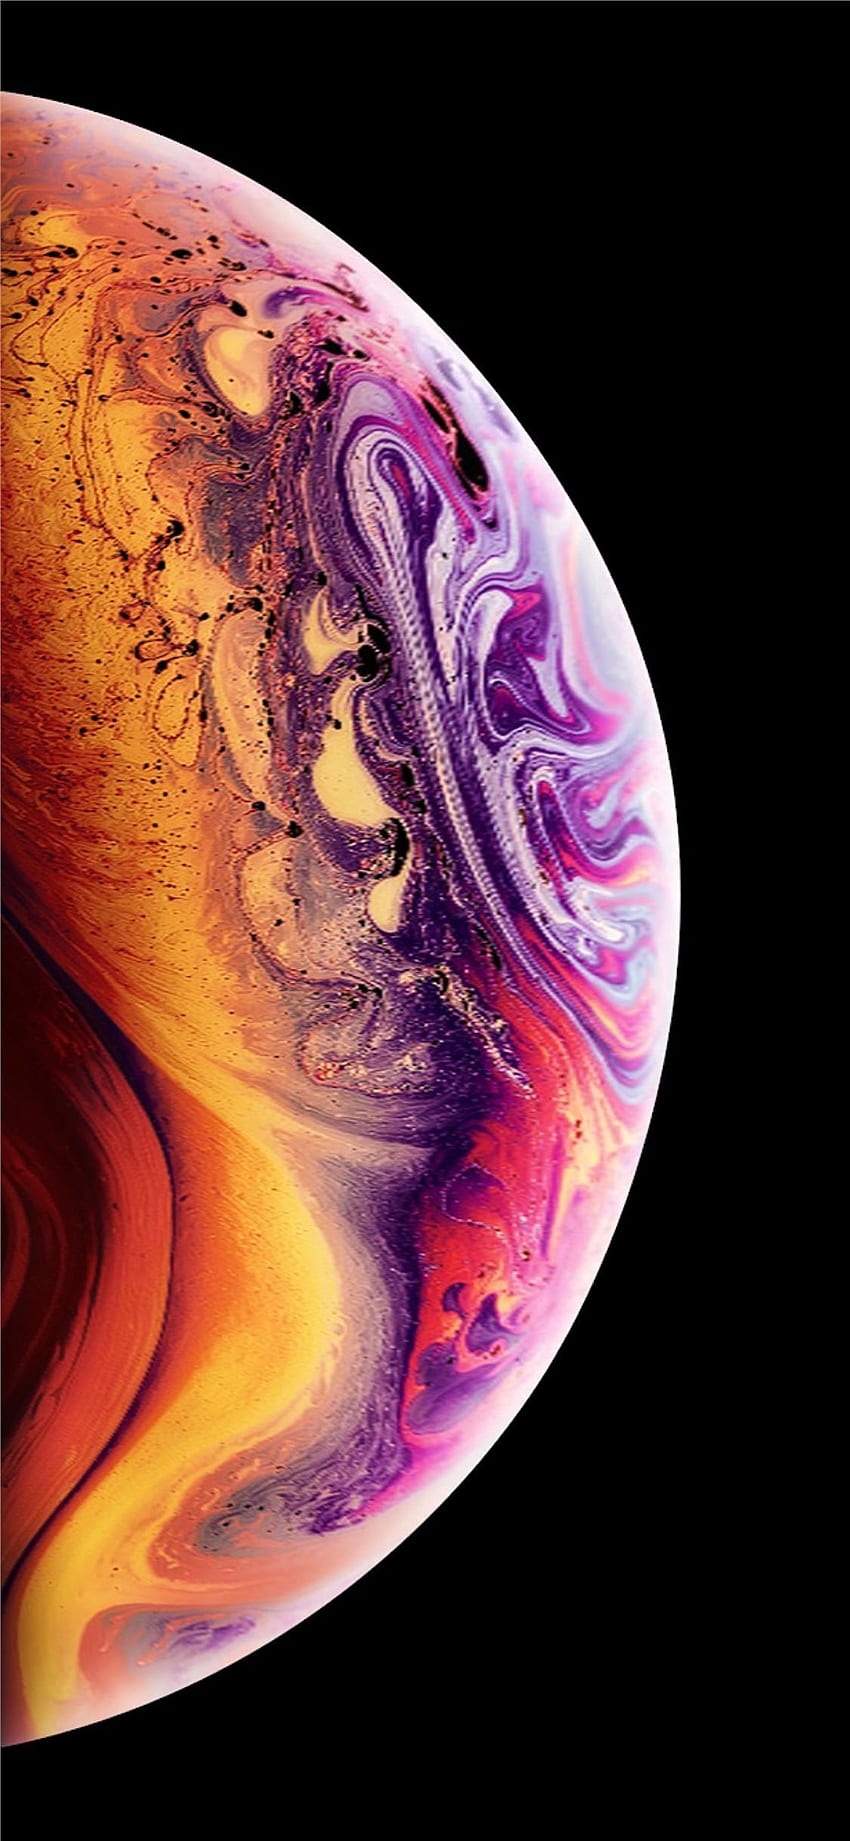 Top 5 Most Memorable iOS Wallpapers of All Time